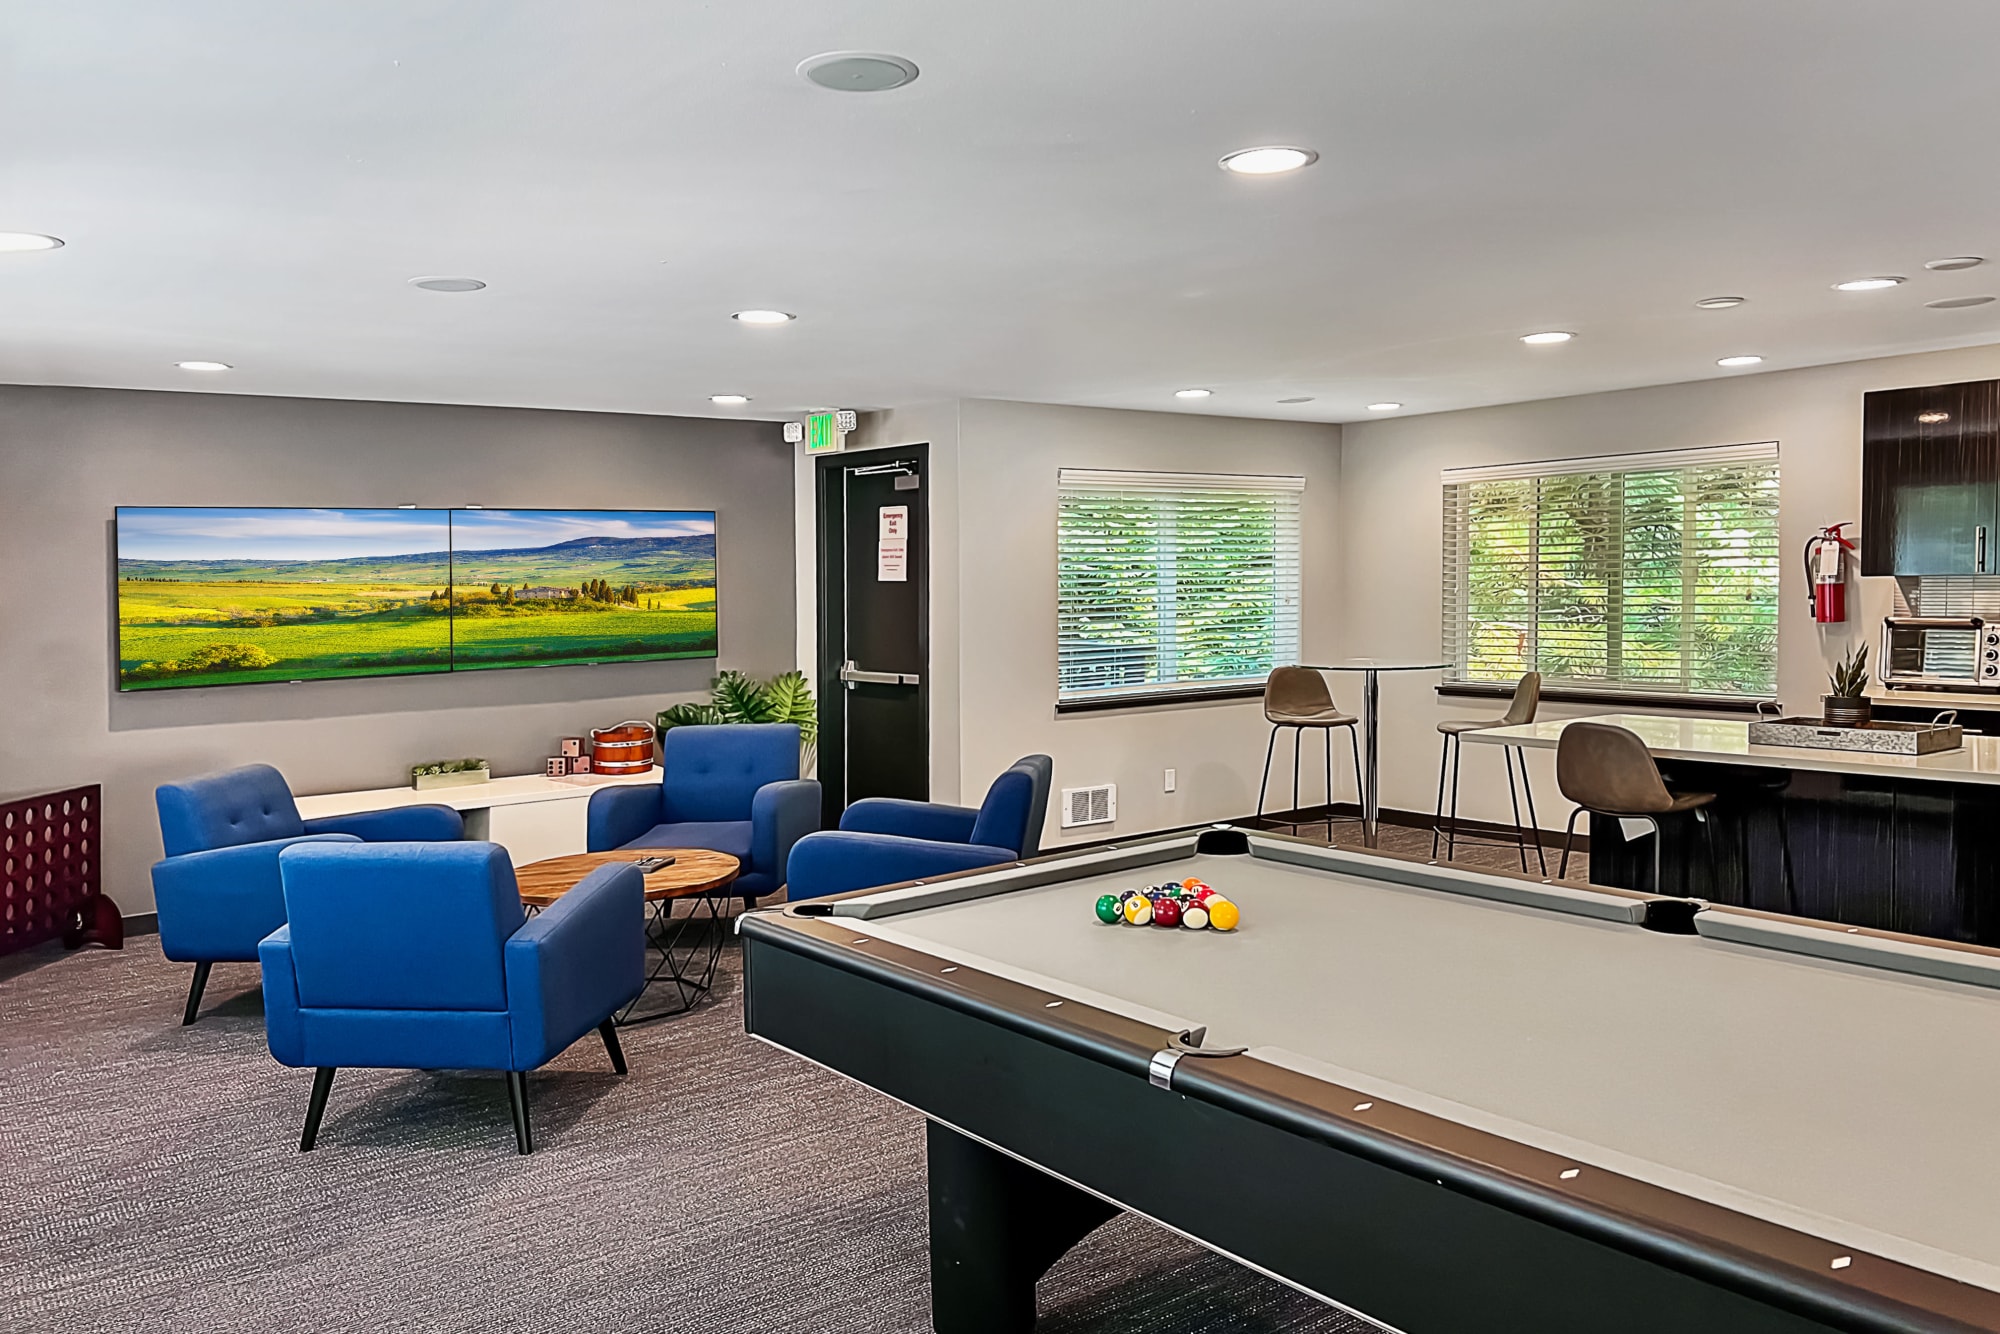 Game room with a pool table at Karbon Apartments in Newcastle, Washington